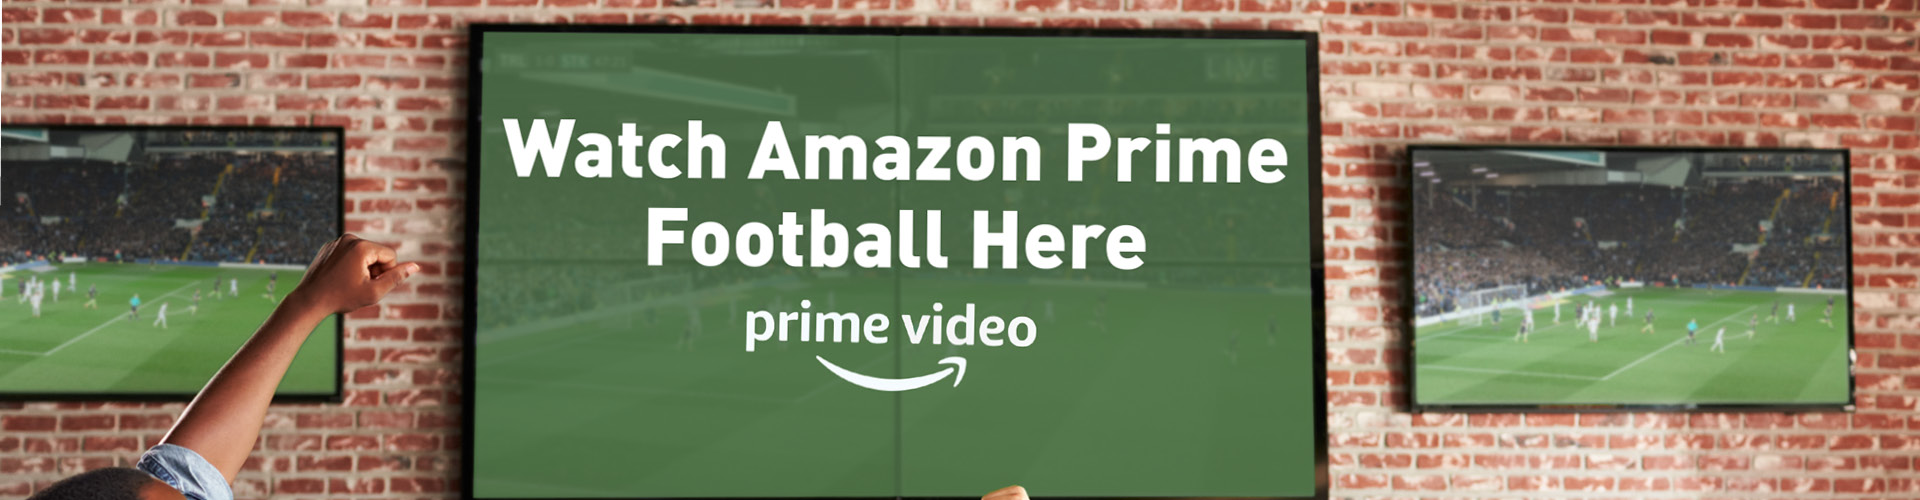 Watch Amazon Prime football at Charles XII in York